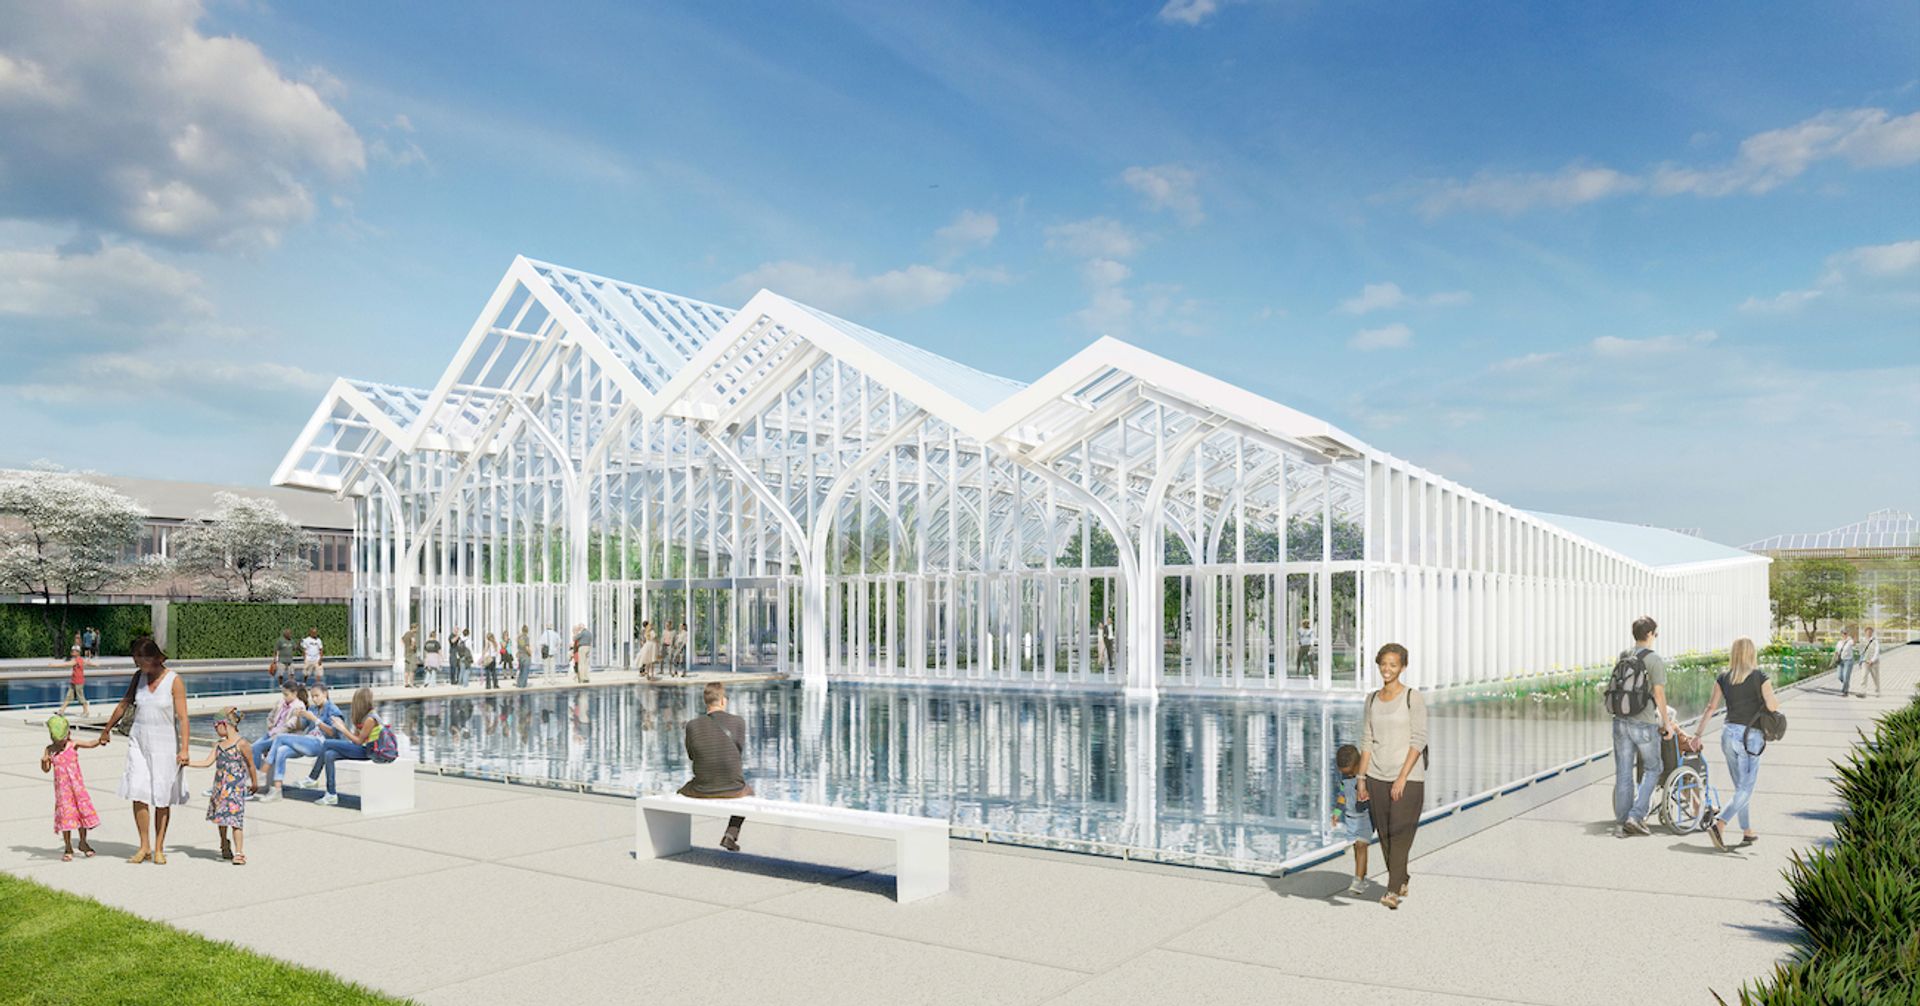 Rendering for the West Conservatory at Longwood Gardens Courtesy of Weiss/Manfredi with Reed Hilderbrand for Longwood Gardens